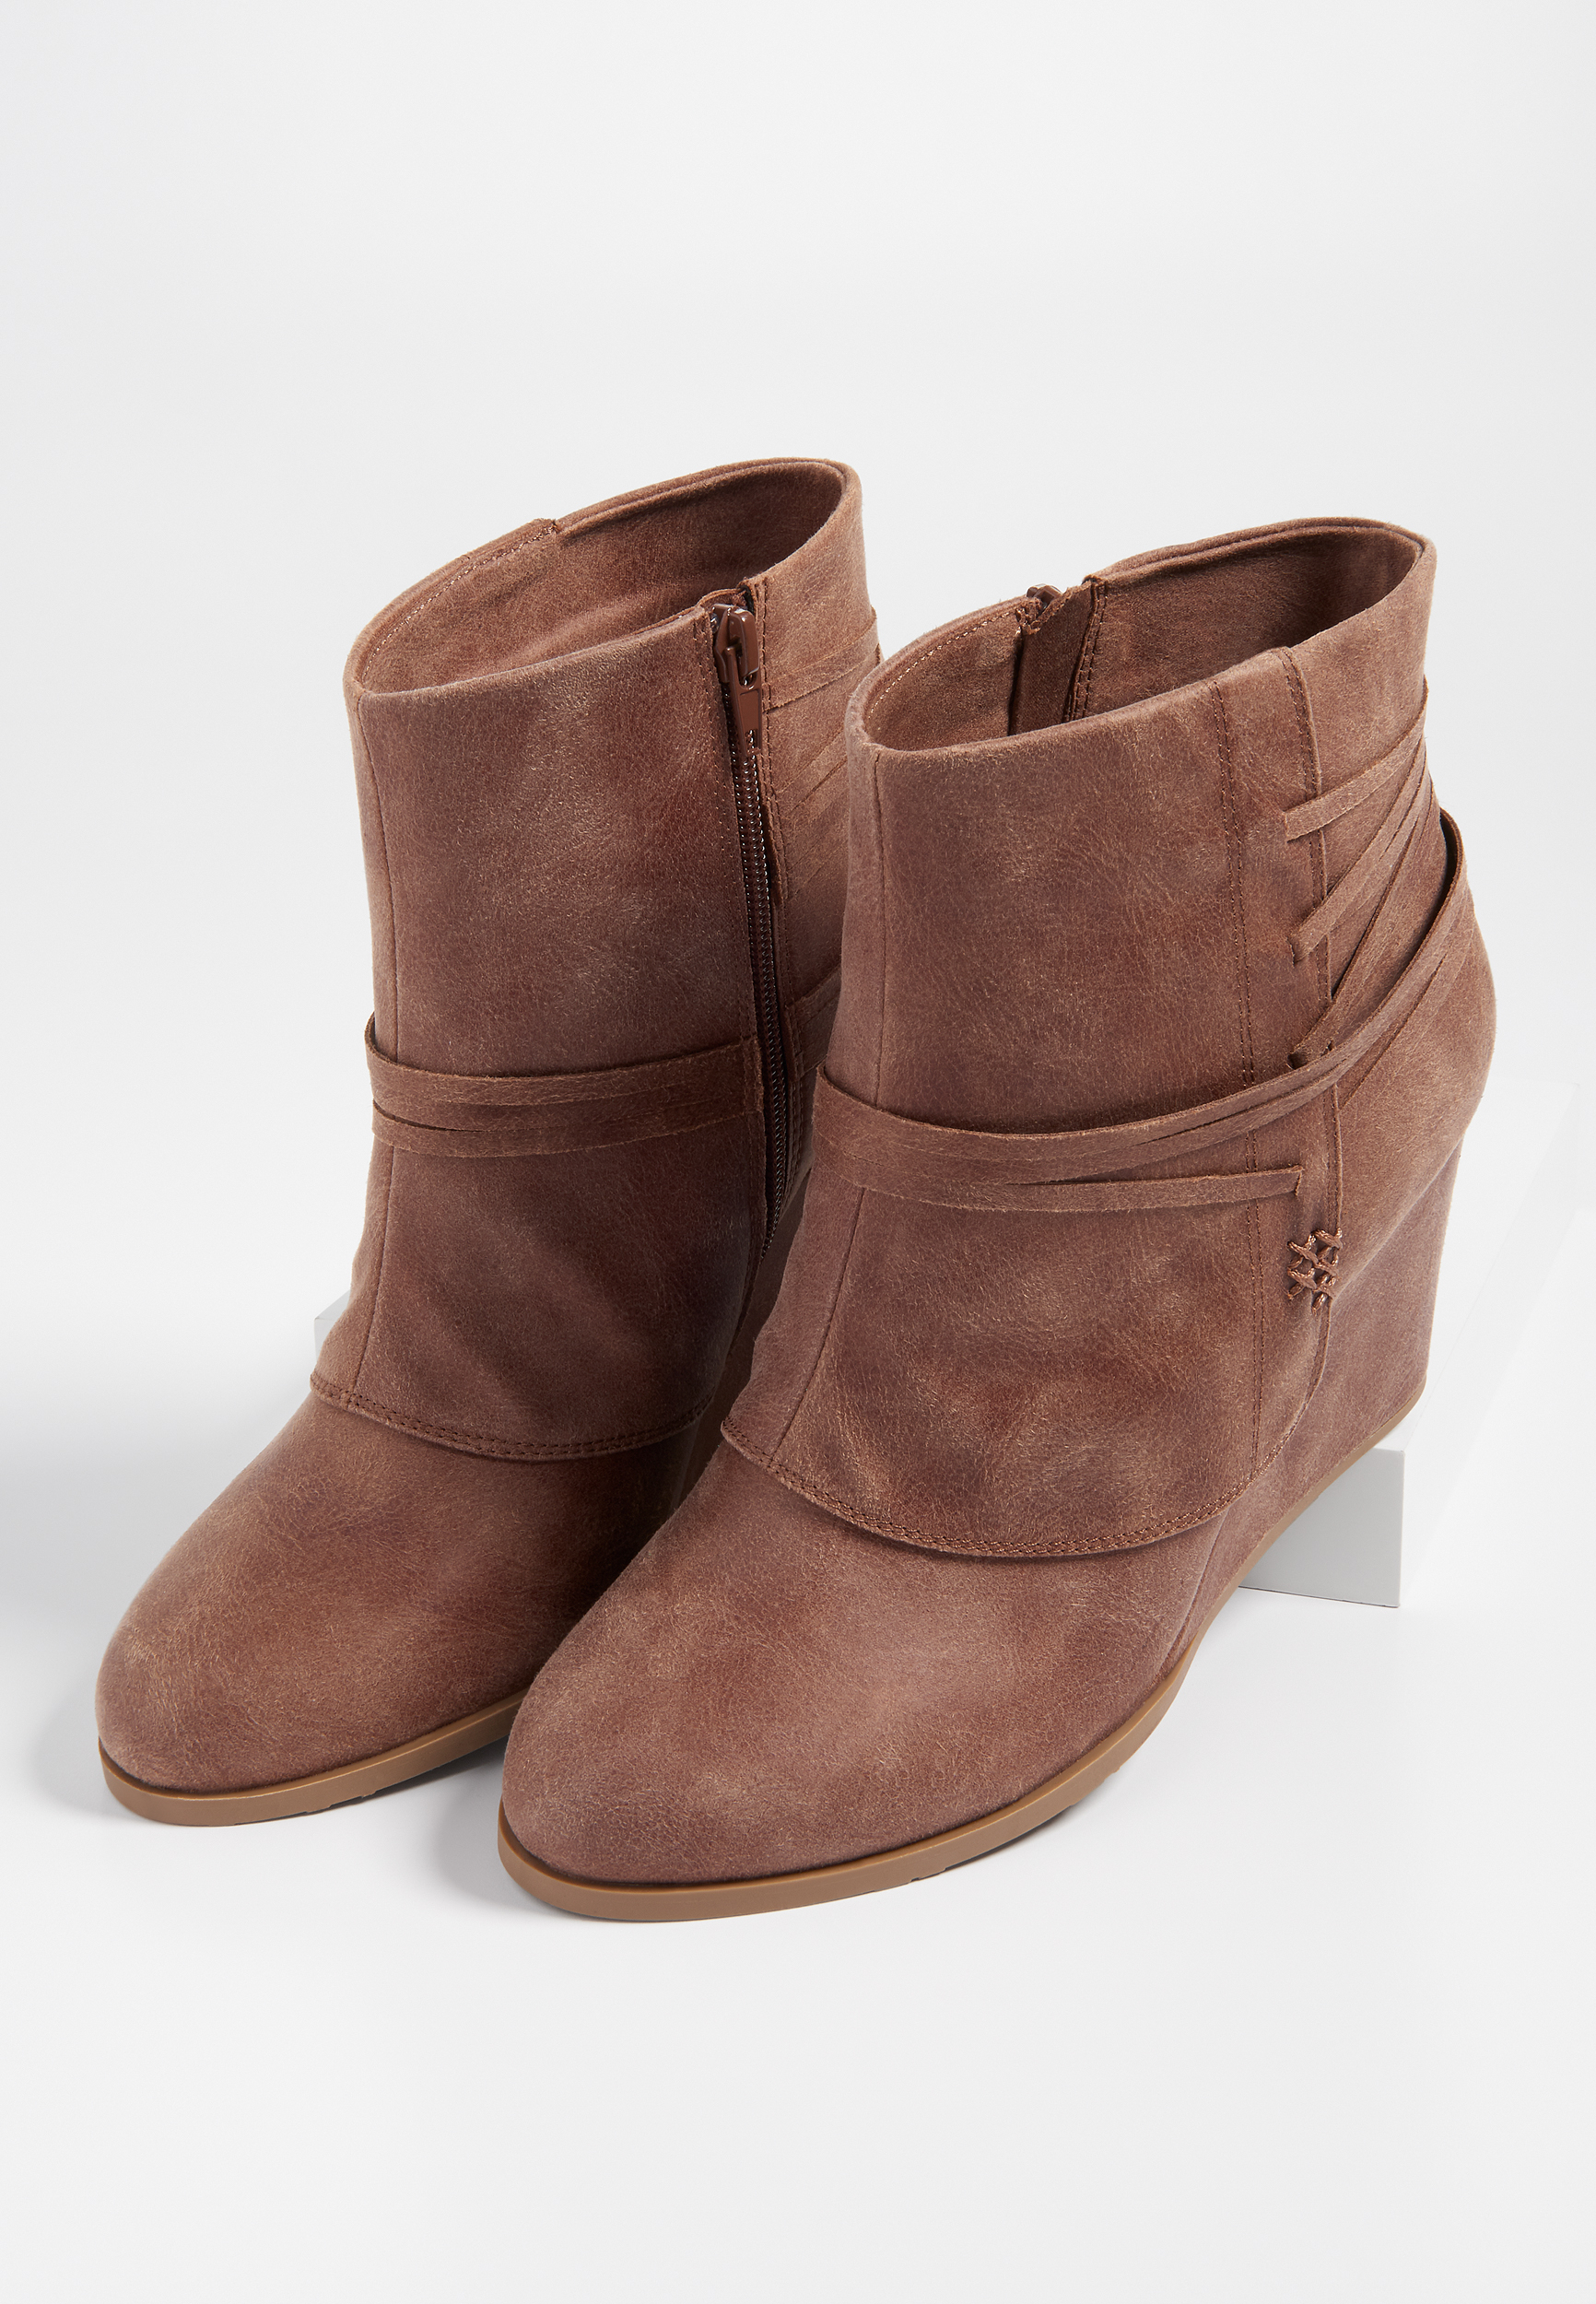 Women's Shoes | Boots, Sneakers, And Wedges | maurices